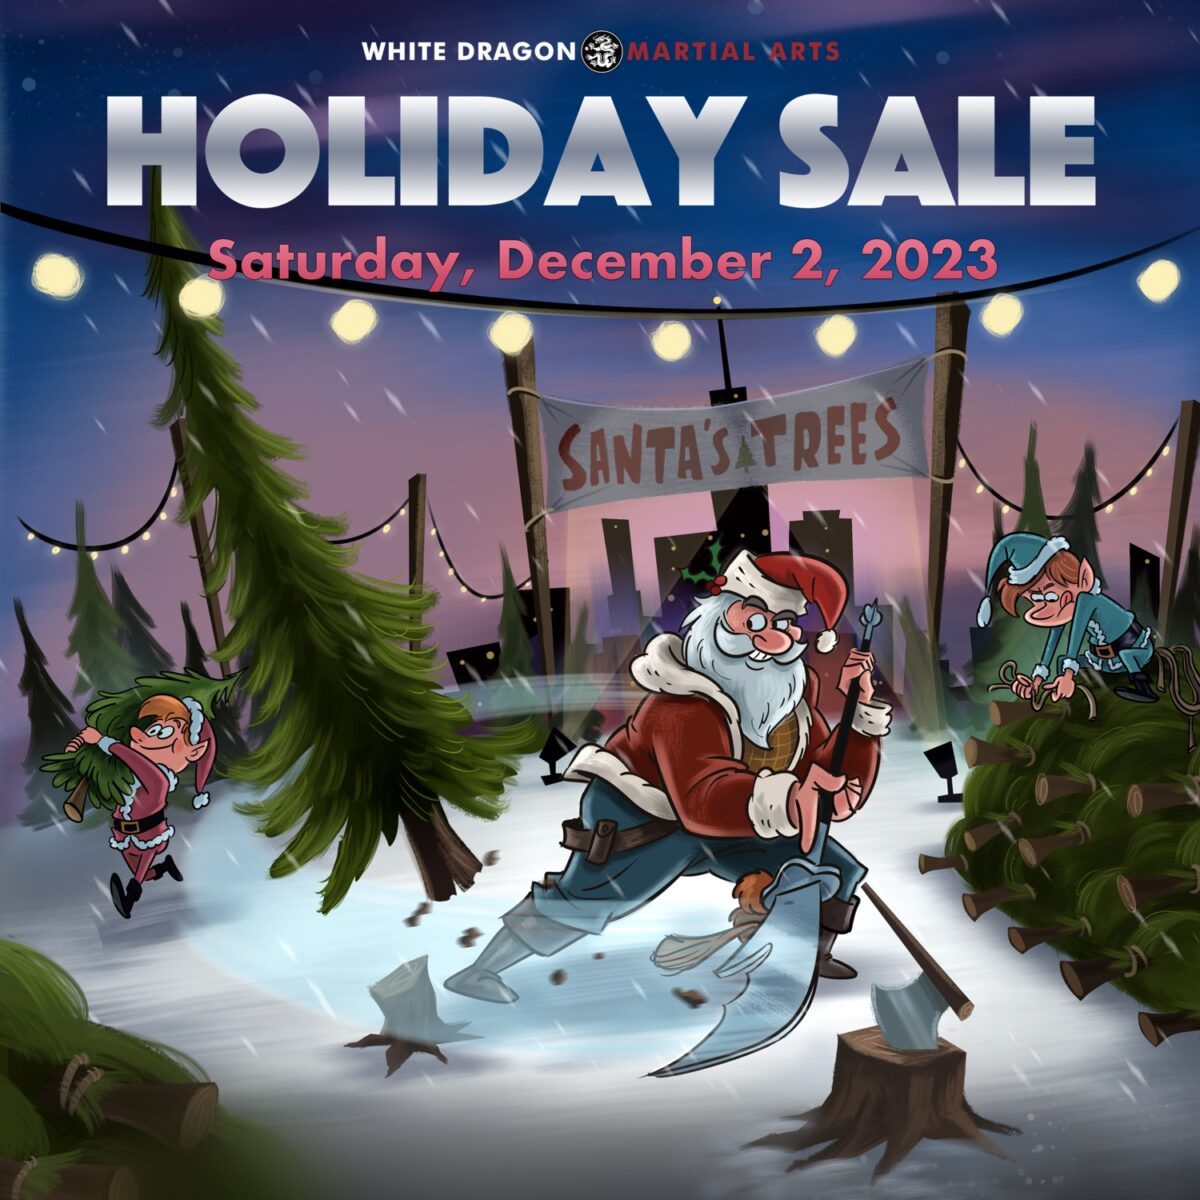 White Dragon Martial Arts Holiday Sale 2023.